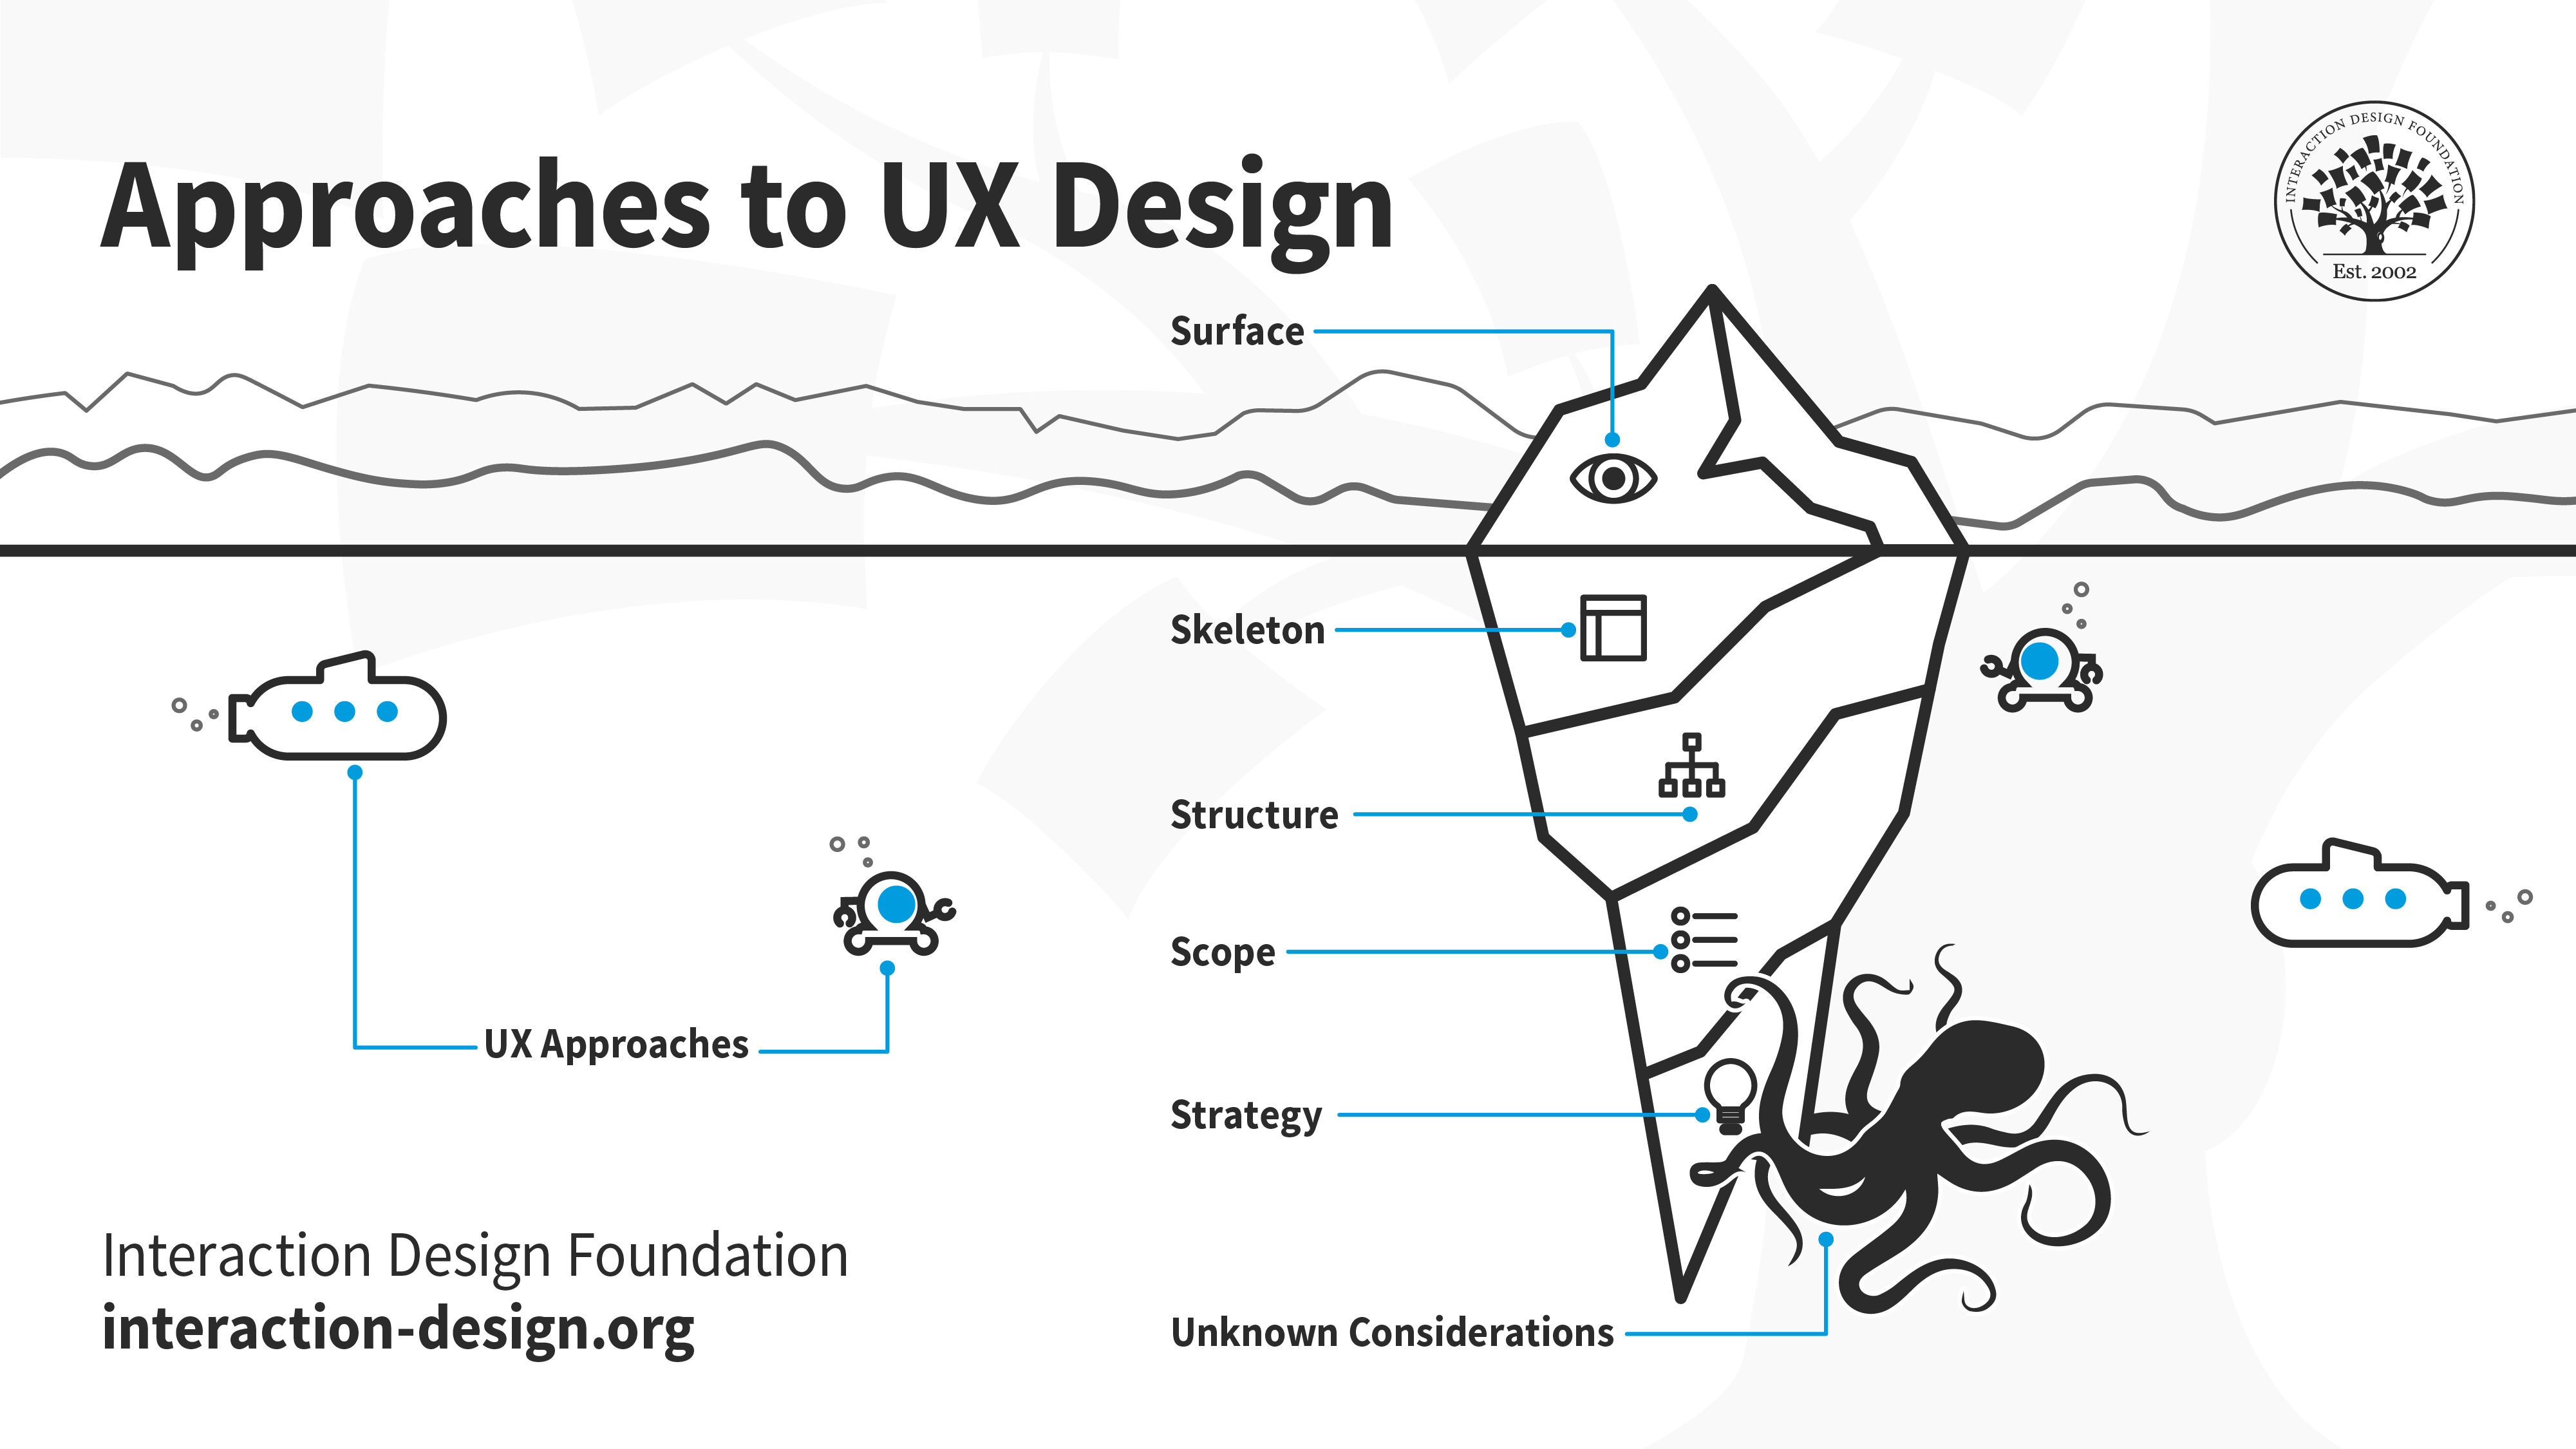 A diagram showing approaches to UX design.